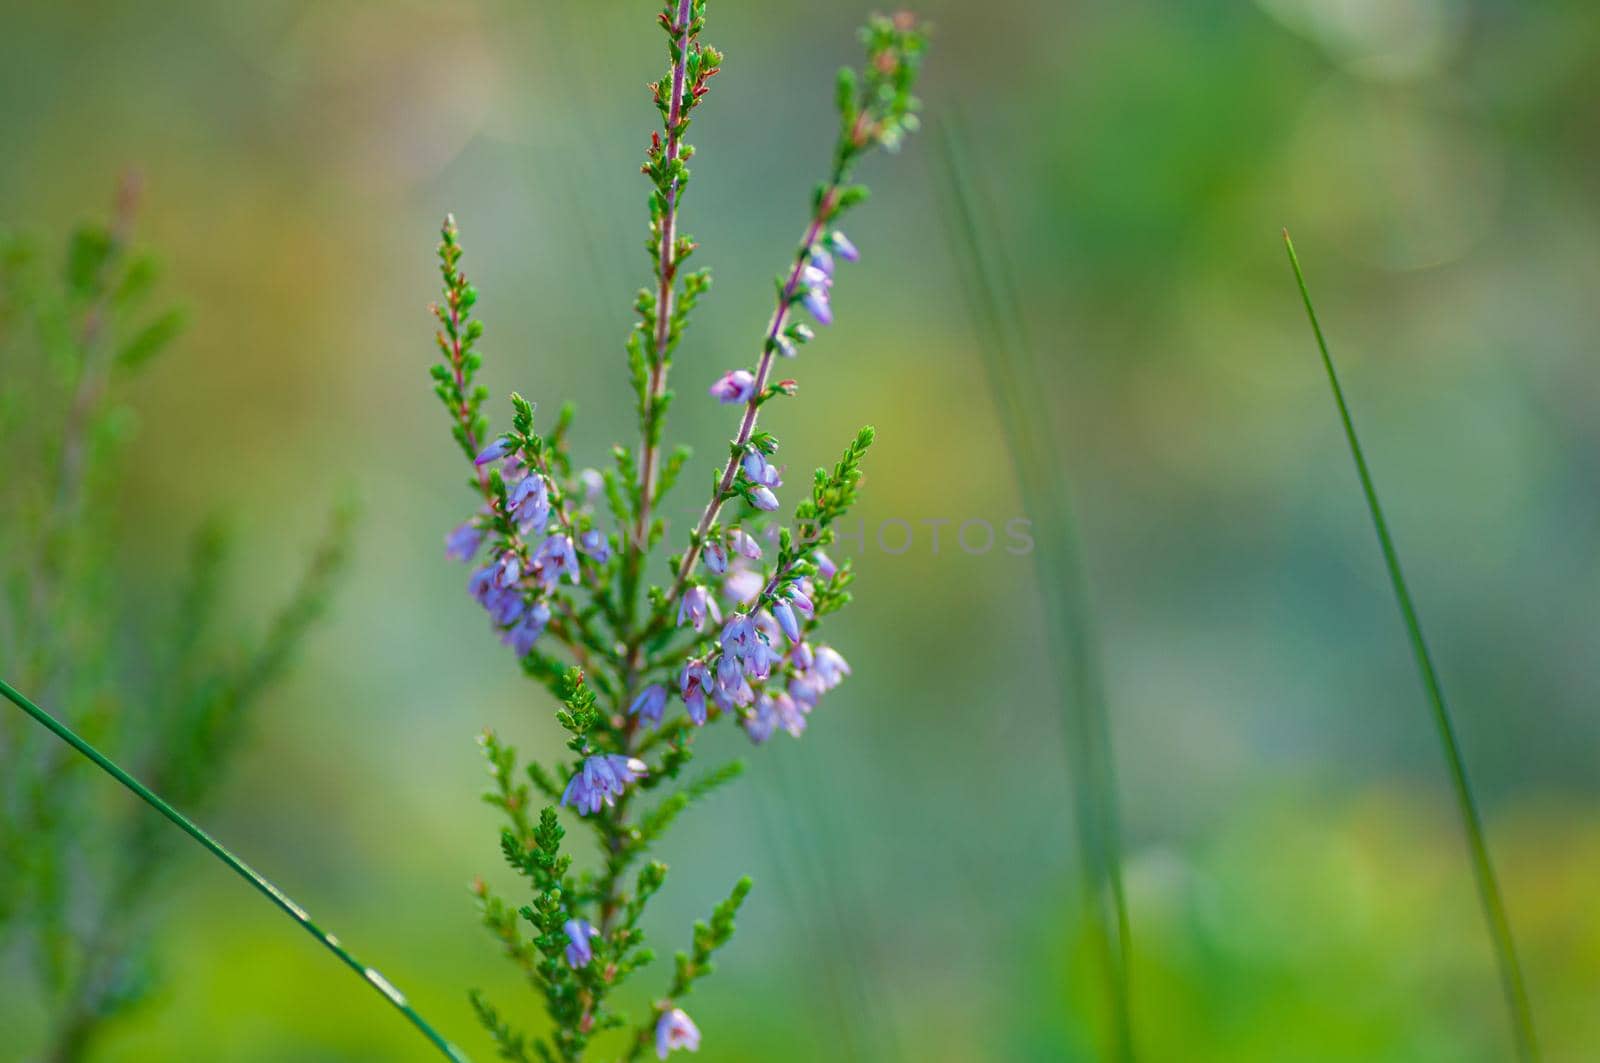 Blurred, abstract, natural background with delicate heather colors. Filmed with a low depth of field by shanserika